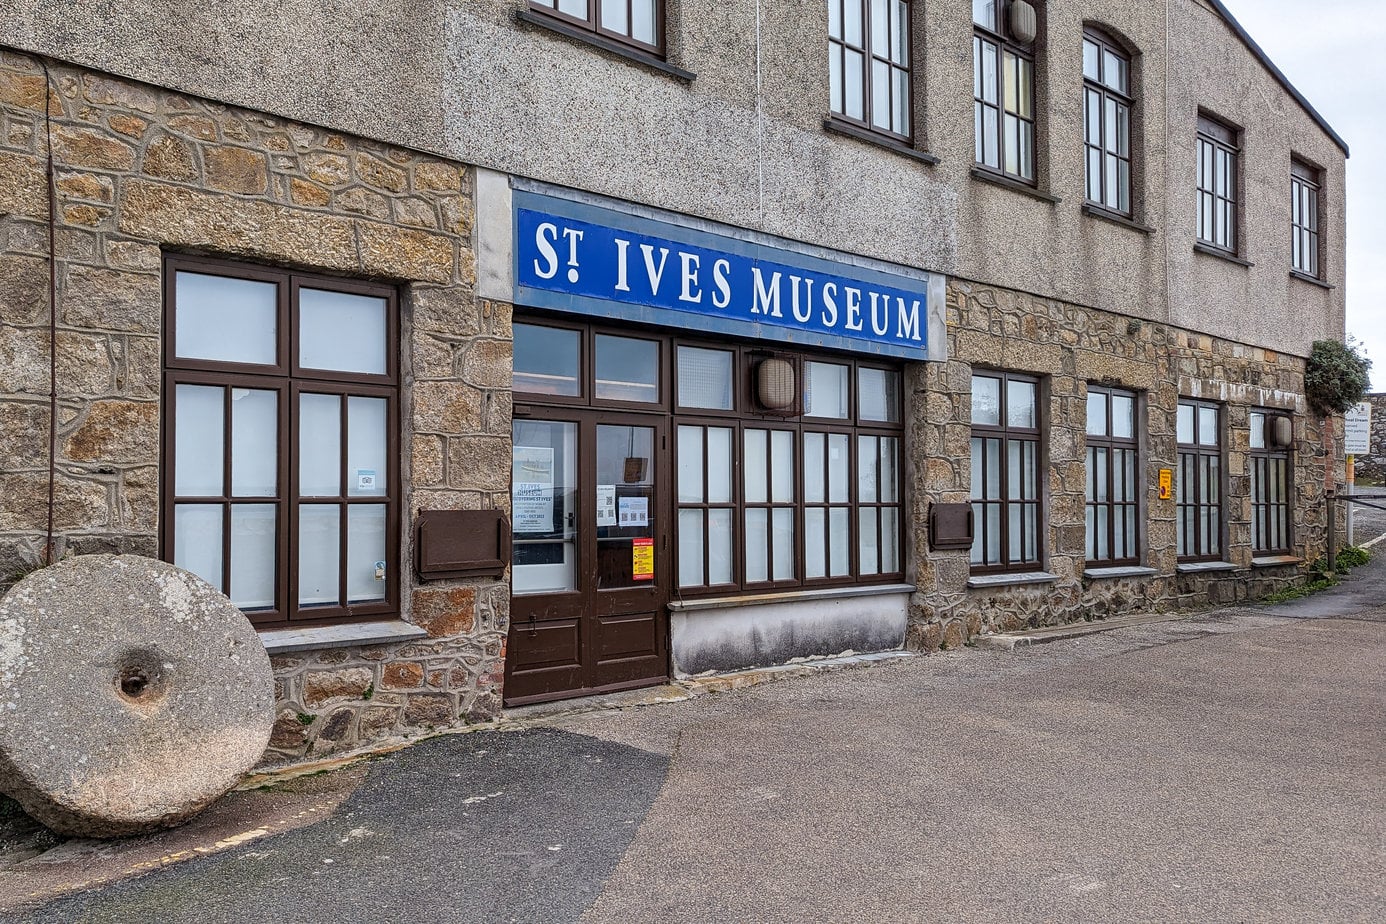 esterior of a large brown and grey stone building with brown frames aroudn the windows and doors and a blue sign that reads St Ives Museum